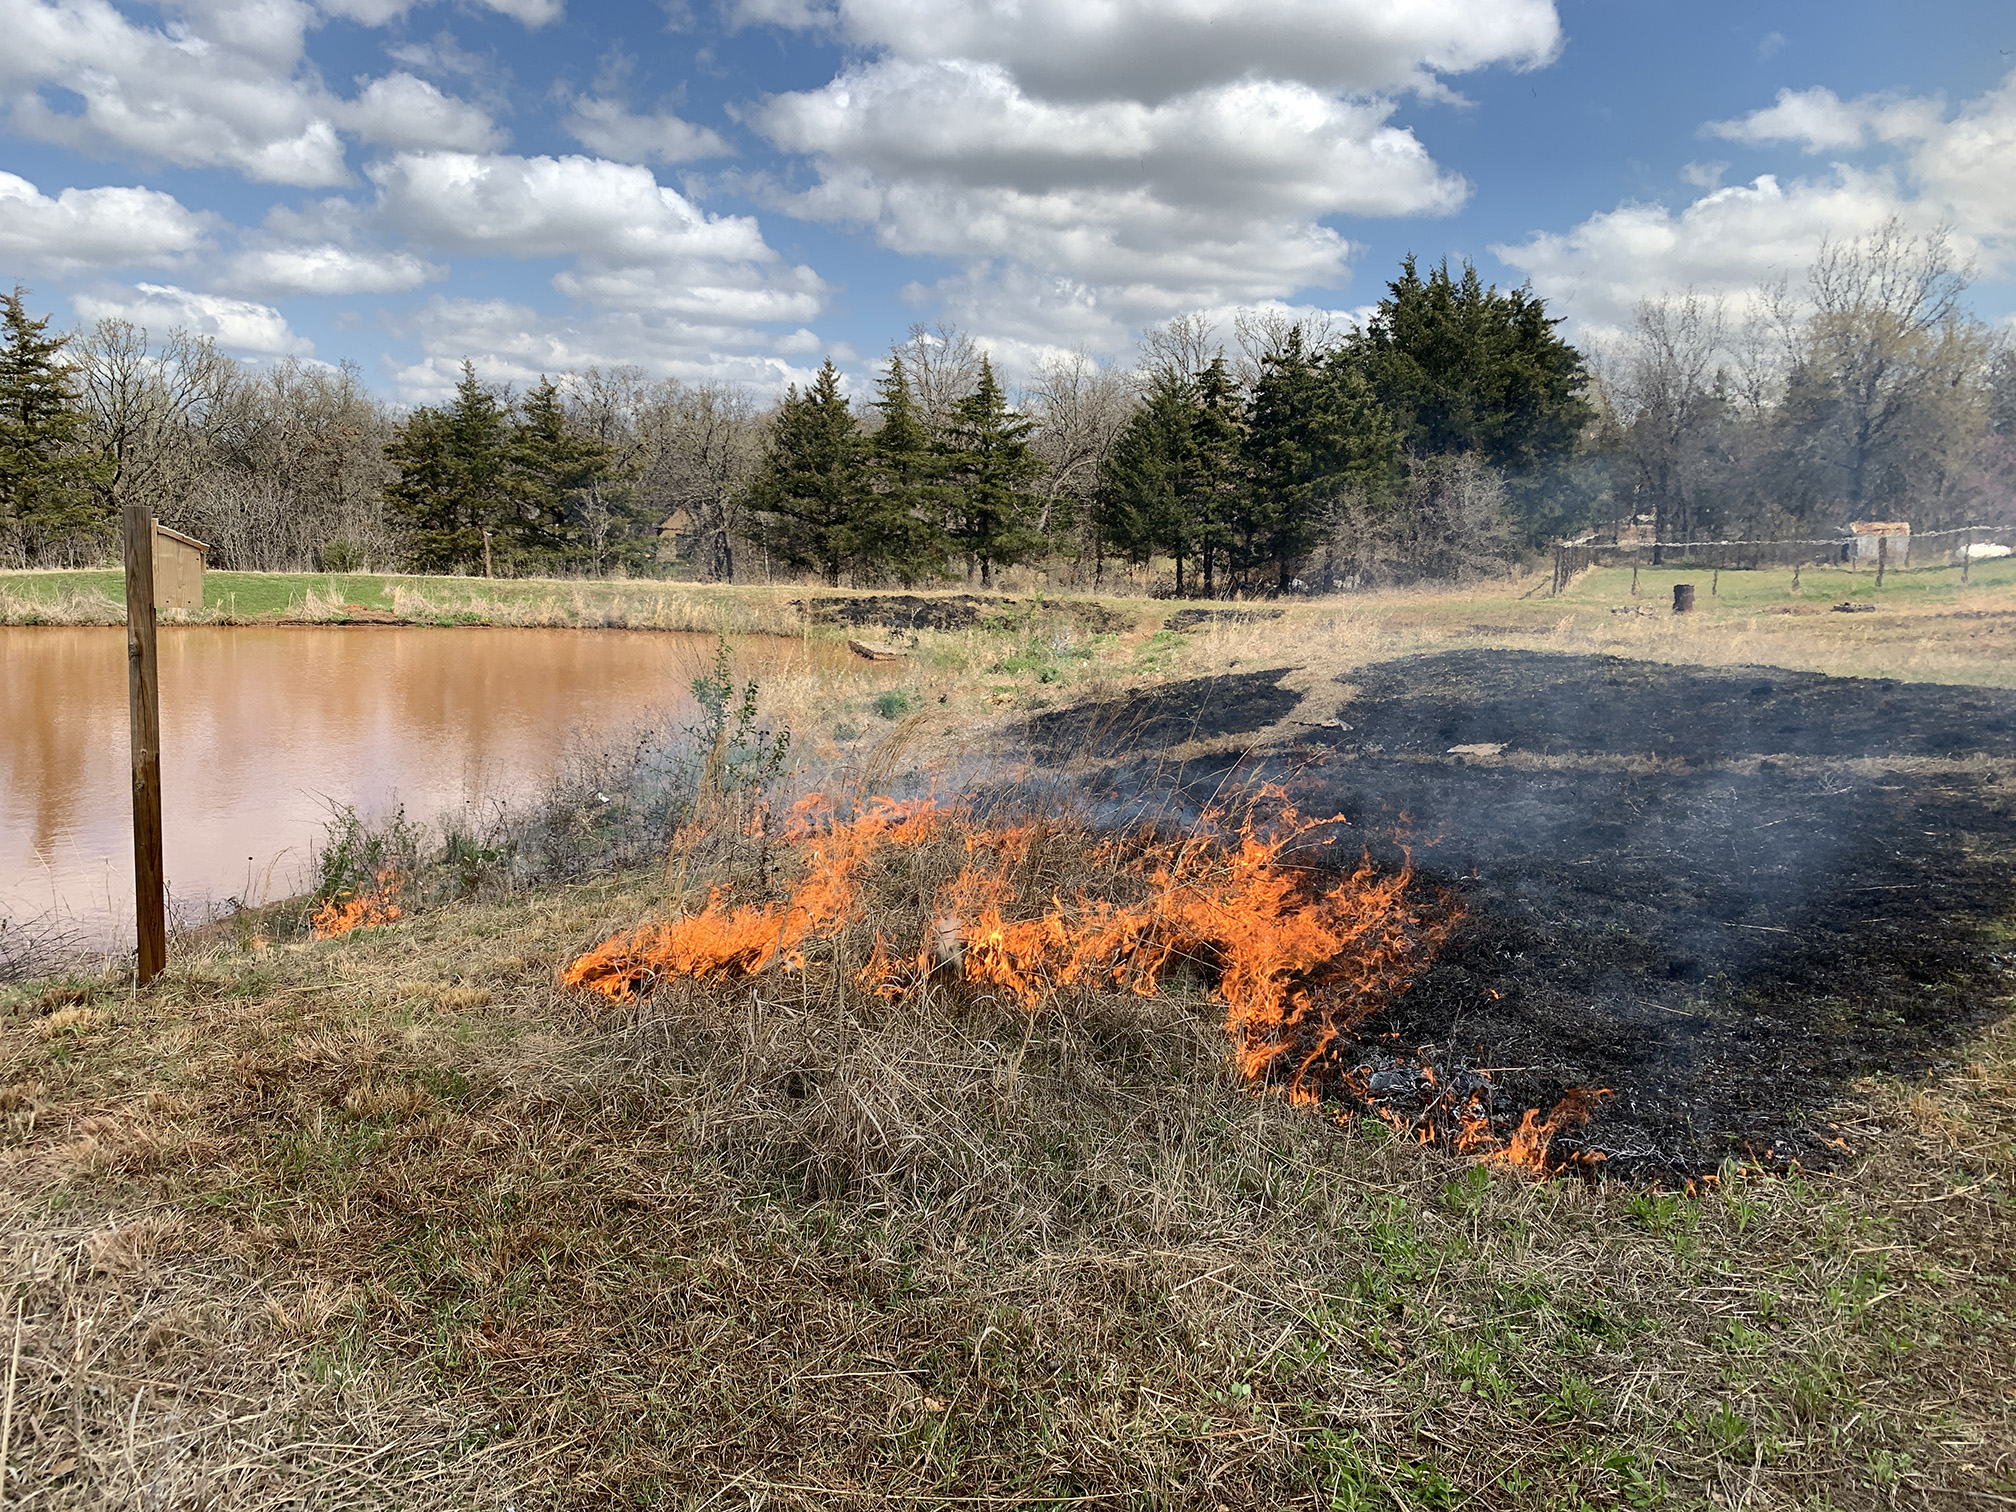 An area of brown grass is being burned. The orange flames are close to the camera, with the blacken burned area stretching beyond. To the left, down a small slope is a pond, and beyond the fire are trees. The sky is blue with white clouds.